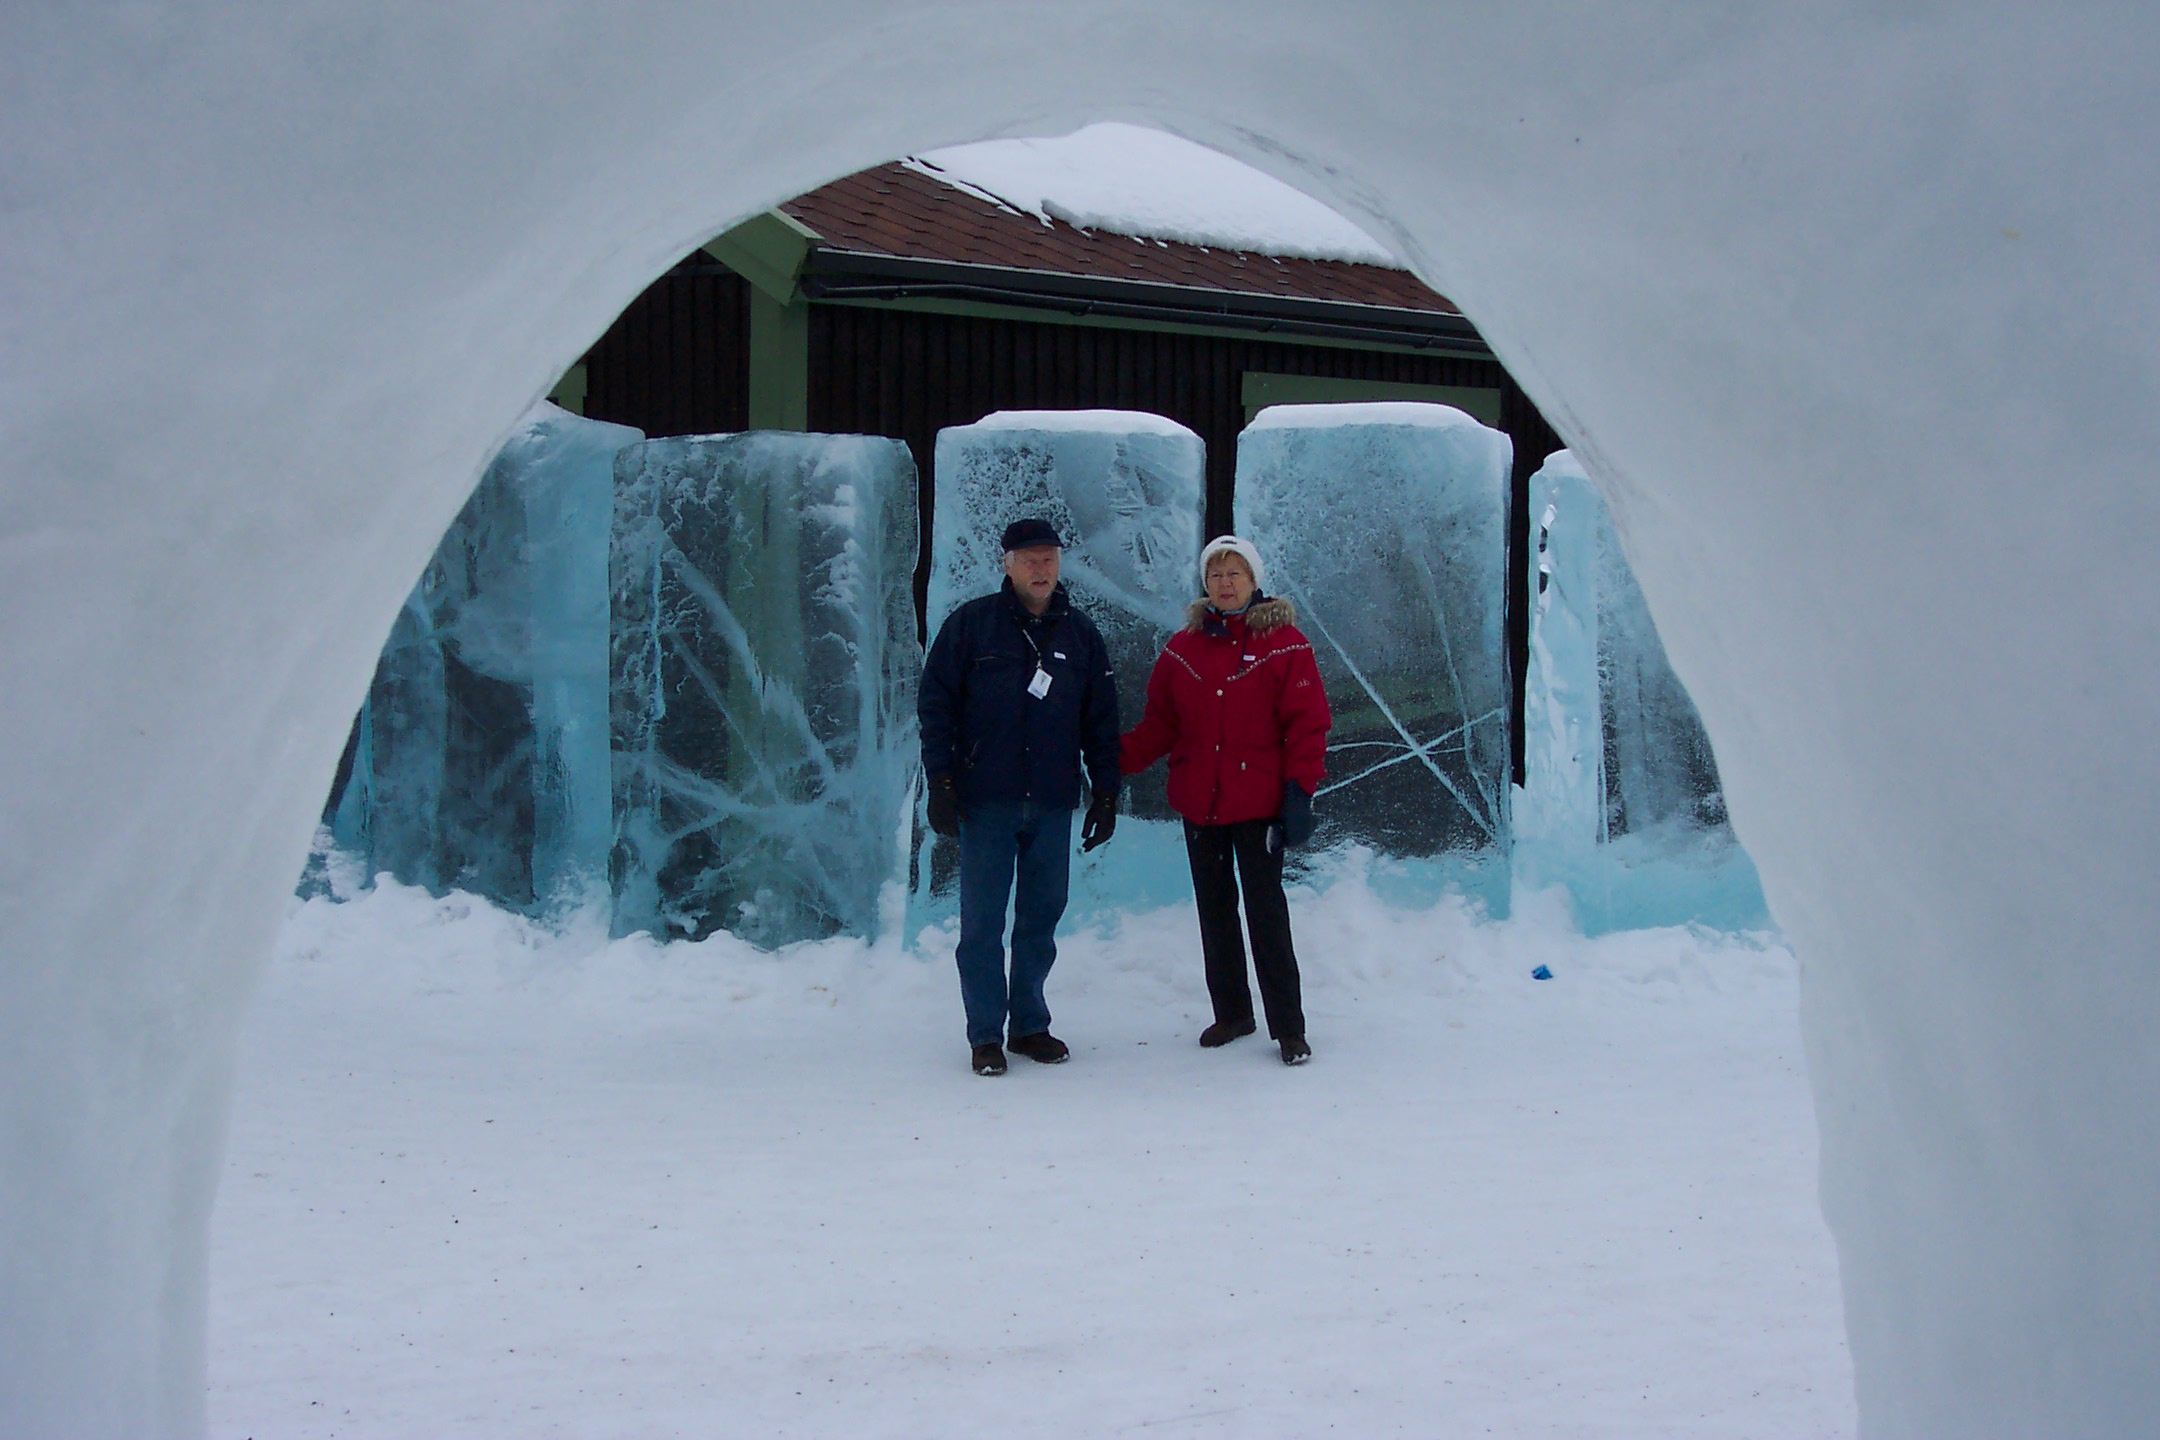 My dad and Ulla at the Ice Hotel in Jukkasjrvi